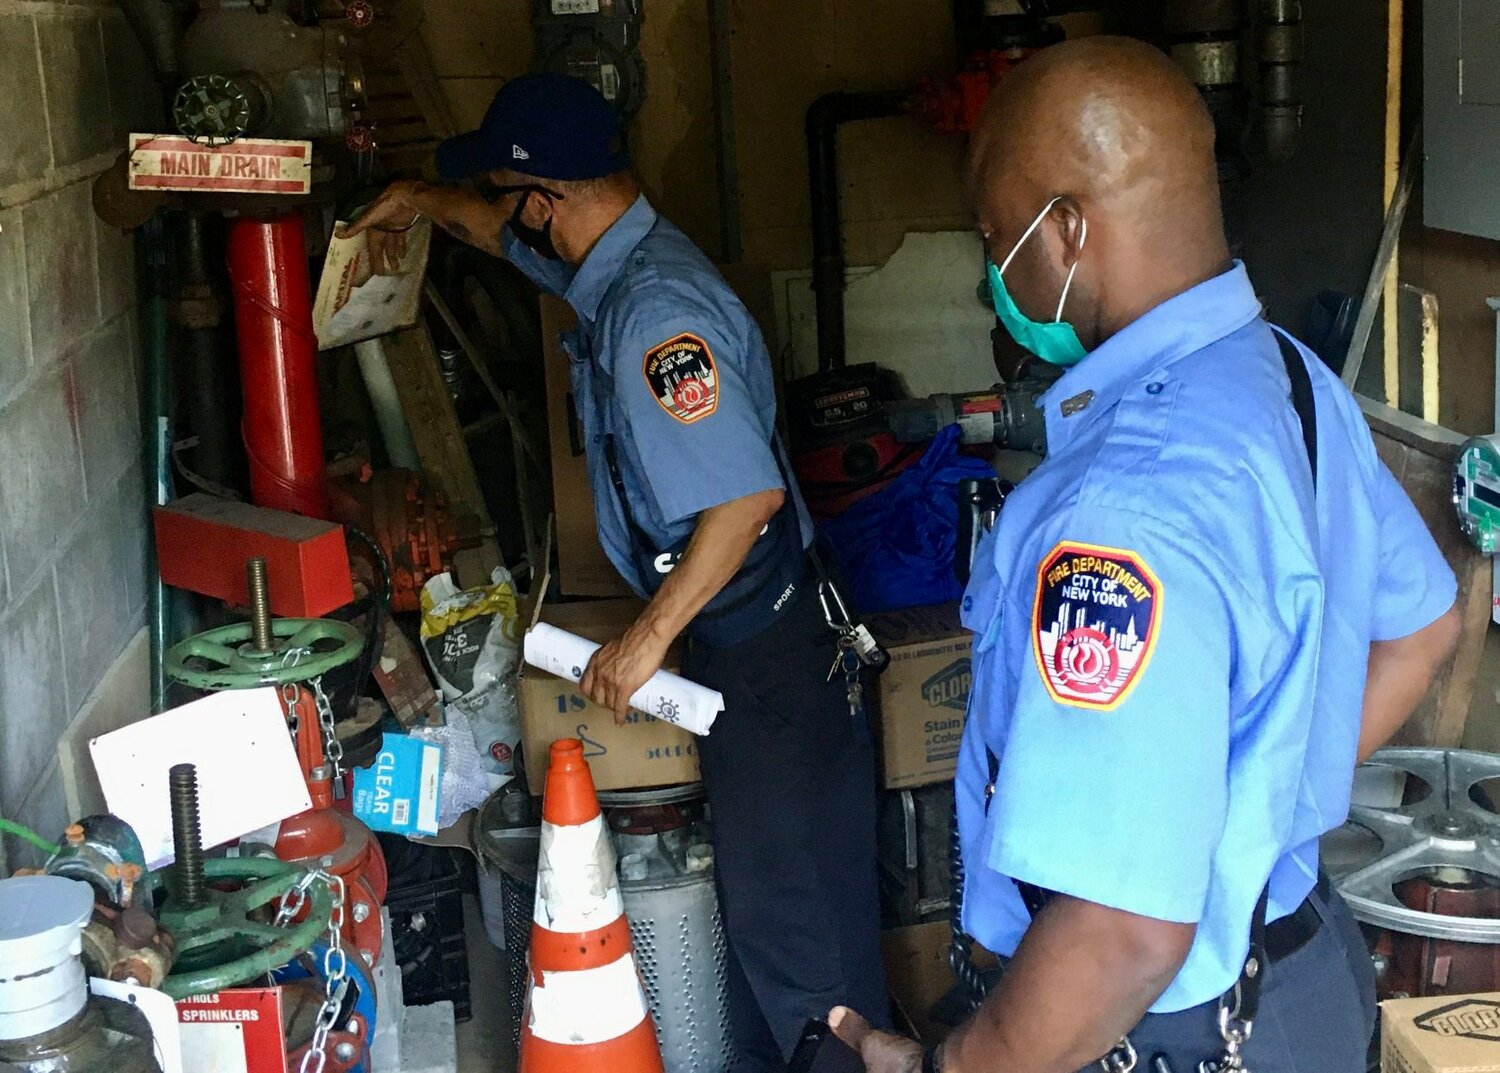 FDNY fire protection inspectors made the rounds in city bars and restaurants in July 2020 ahead of that pandemic year’s Independence Day holiday.